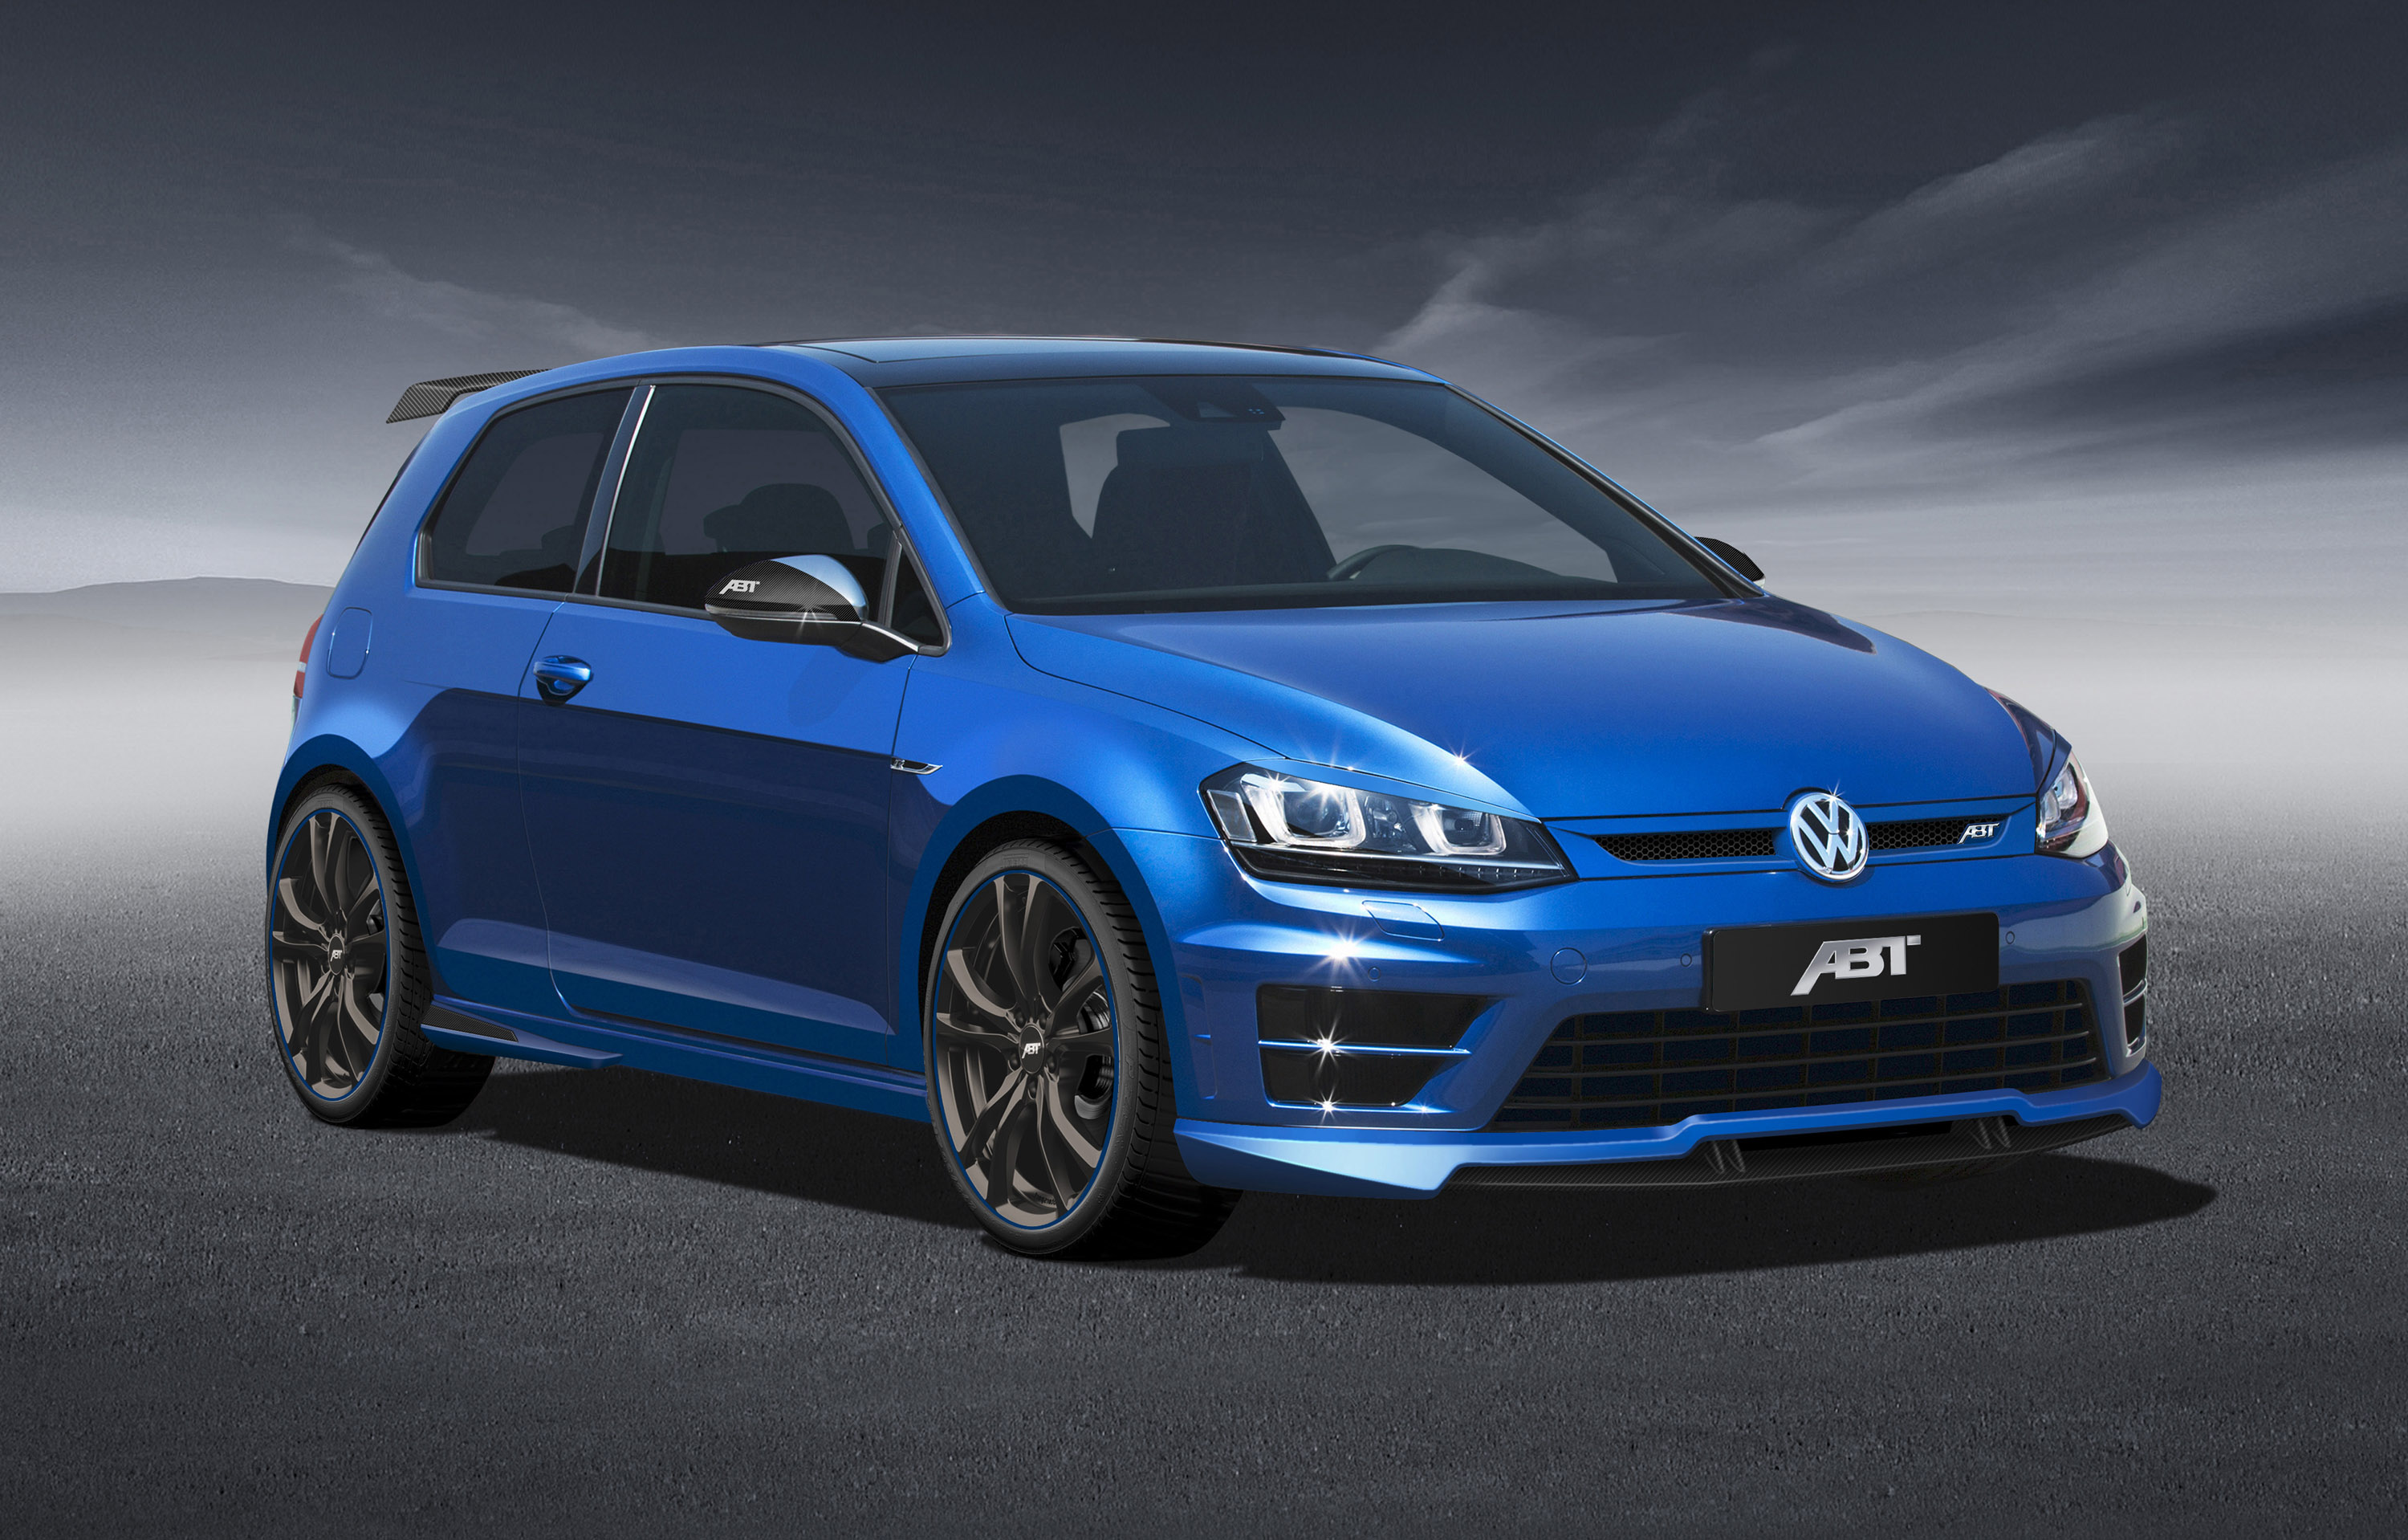 ABT Volkswagen Golf VII R 370HP and 460Nm